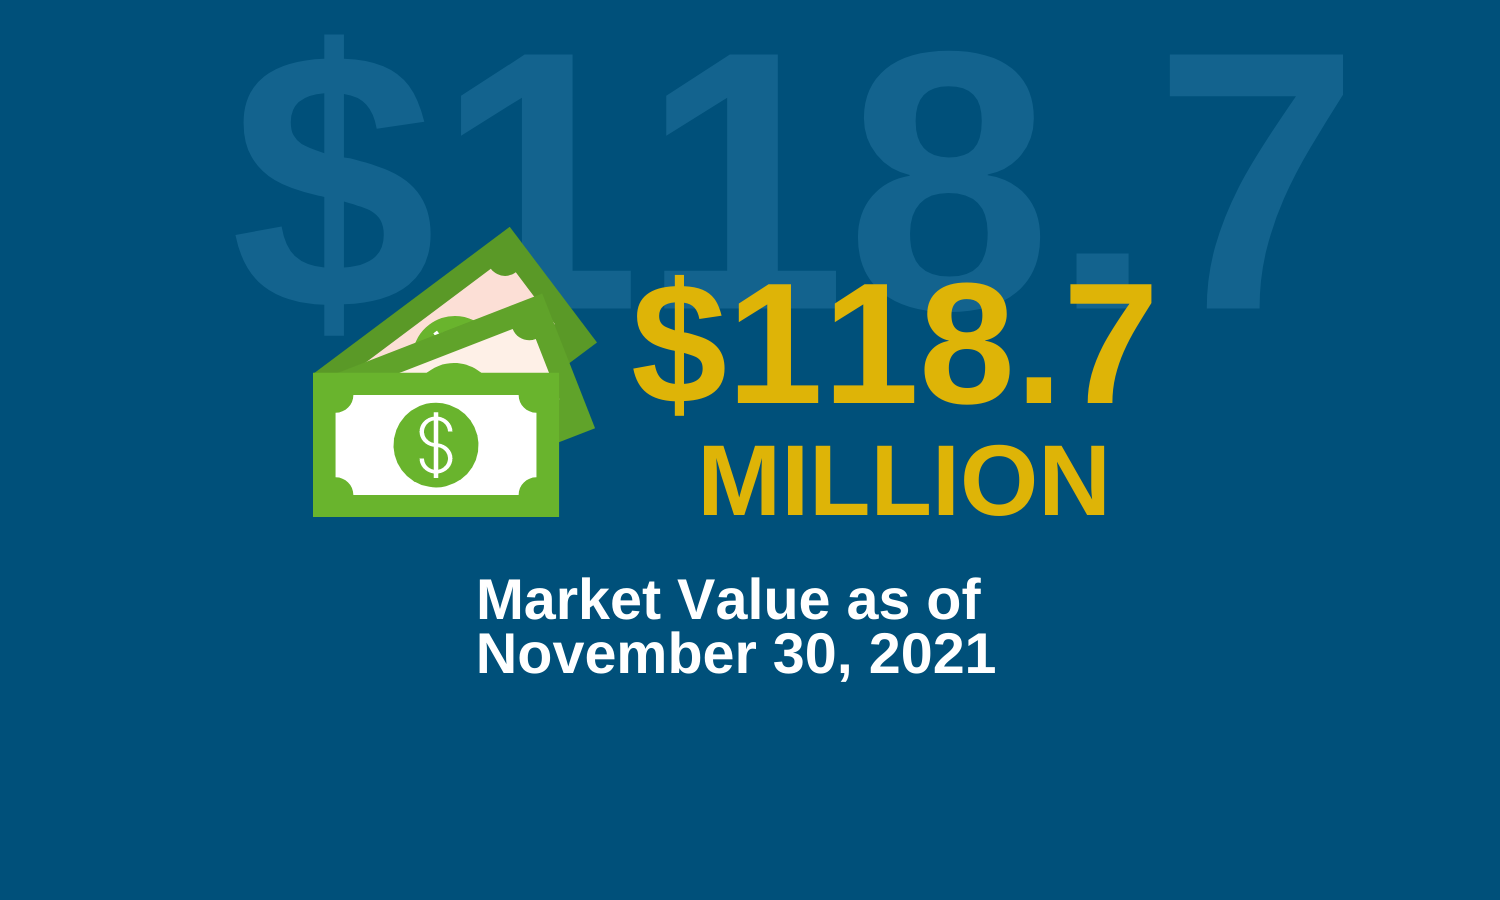 Graphic describing the market value at $118.7 million dollars as of November 30, 2021.